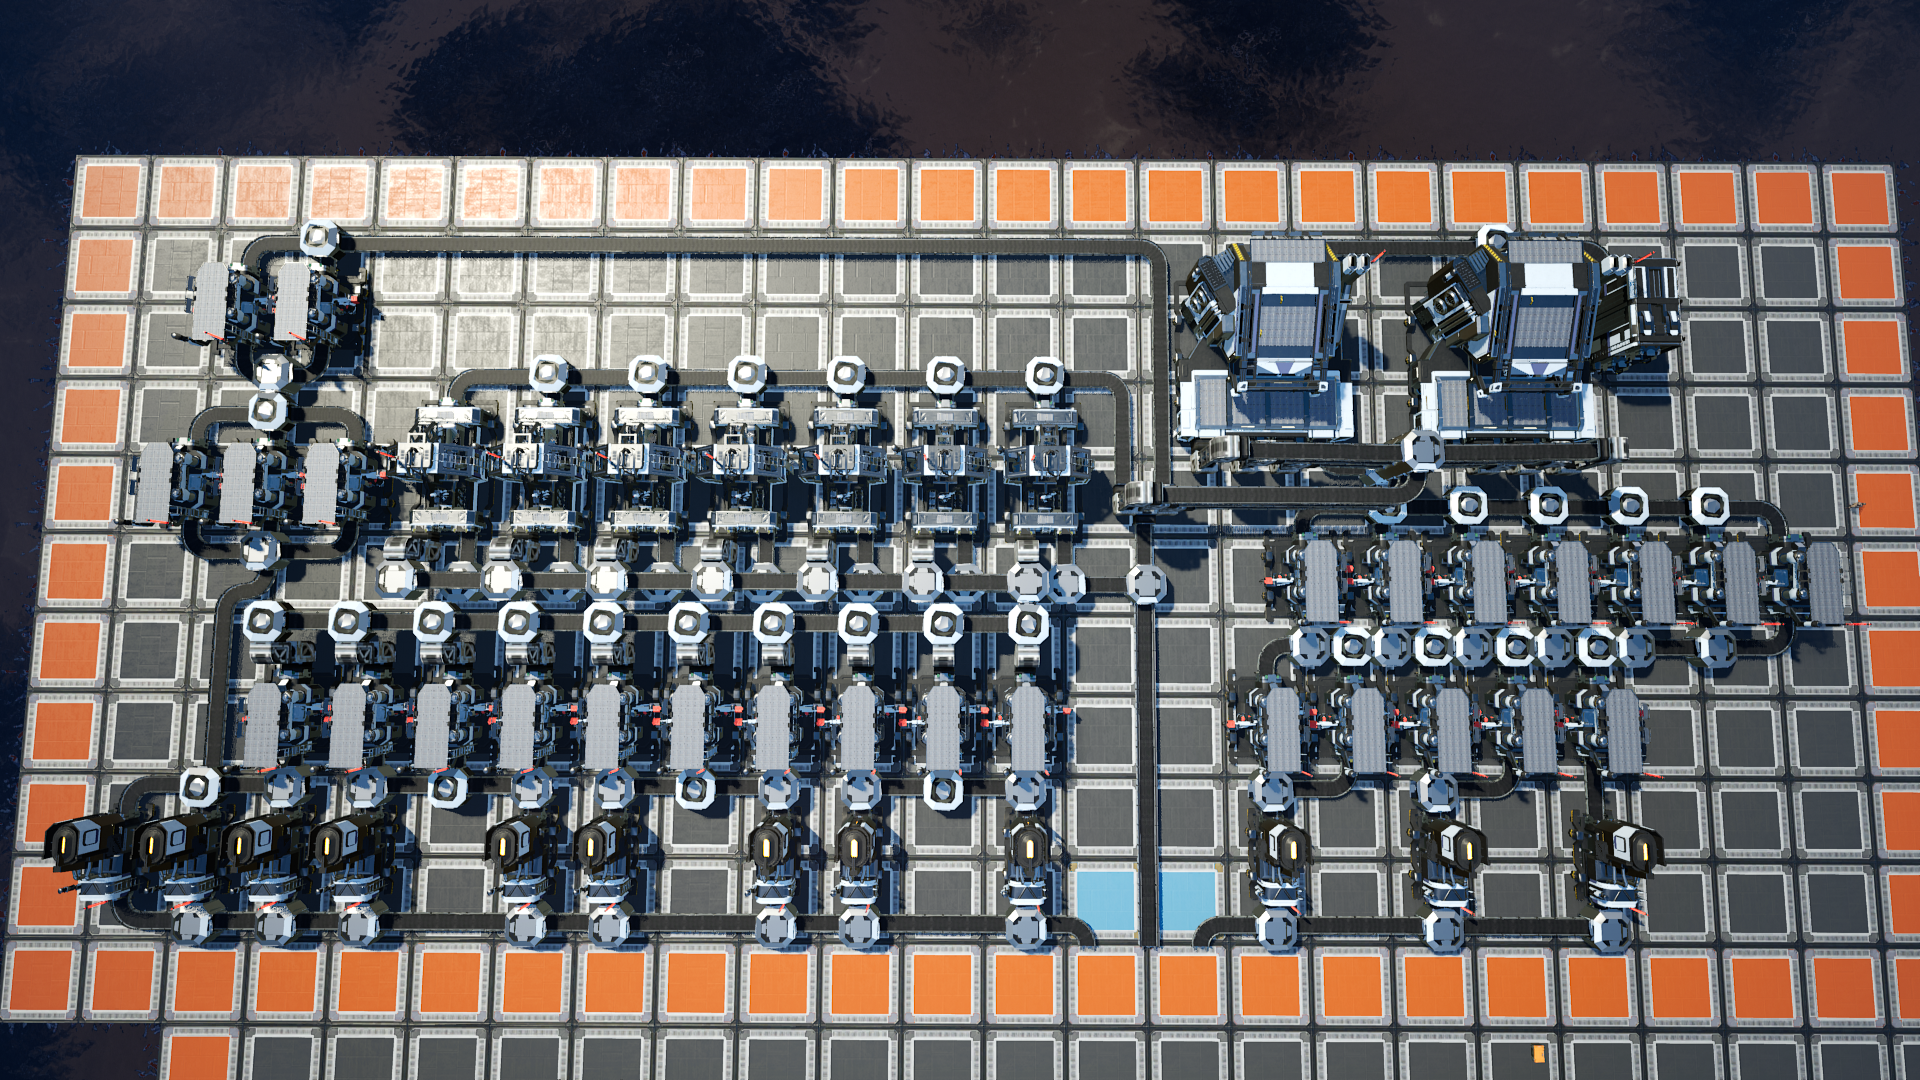 Computer Factory layout